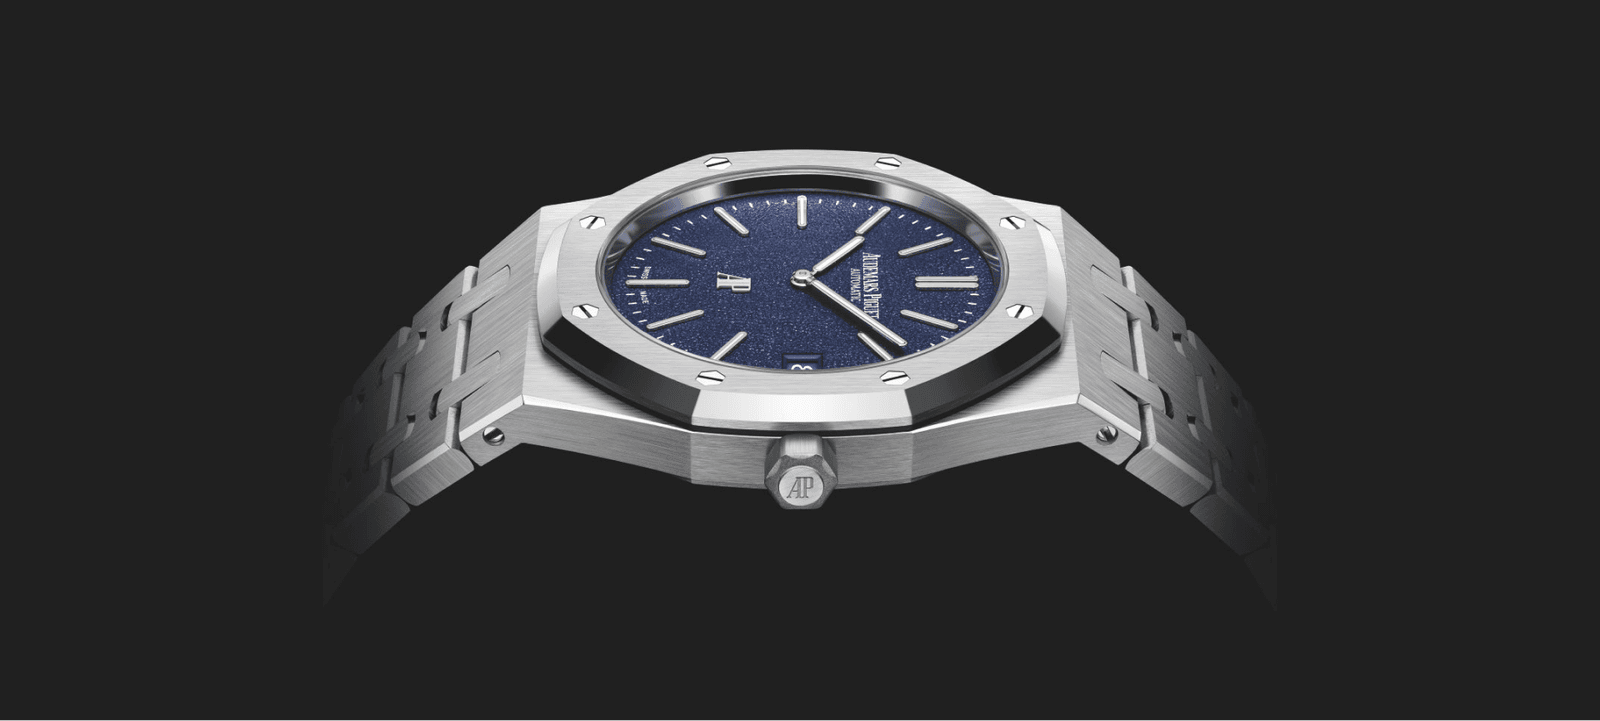 Royal Oak “Jumbo” Extra-Thin with Blue-Grained Dial 